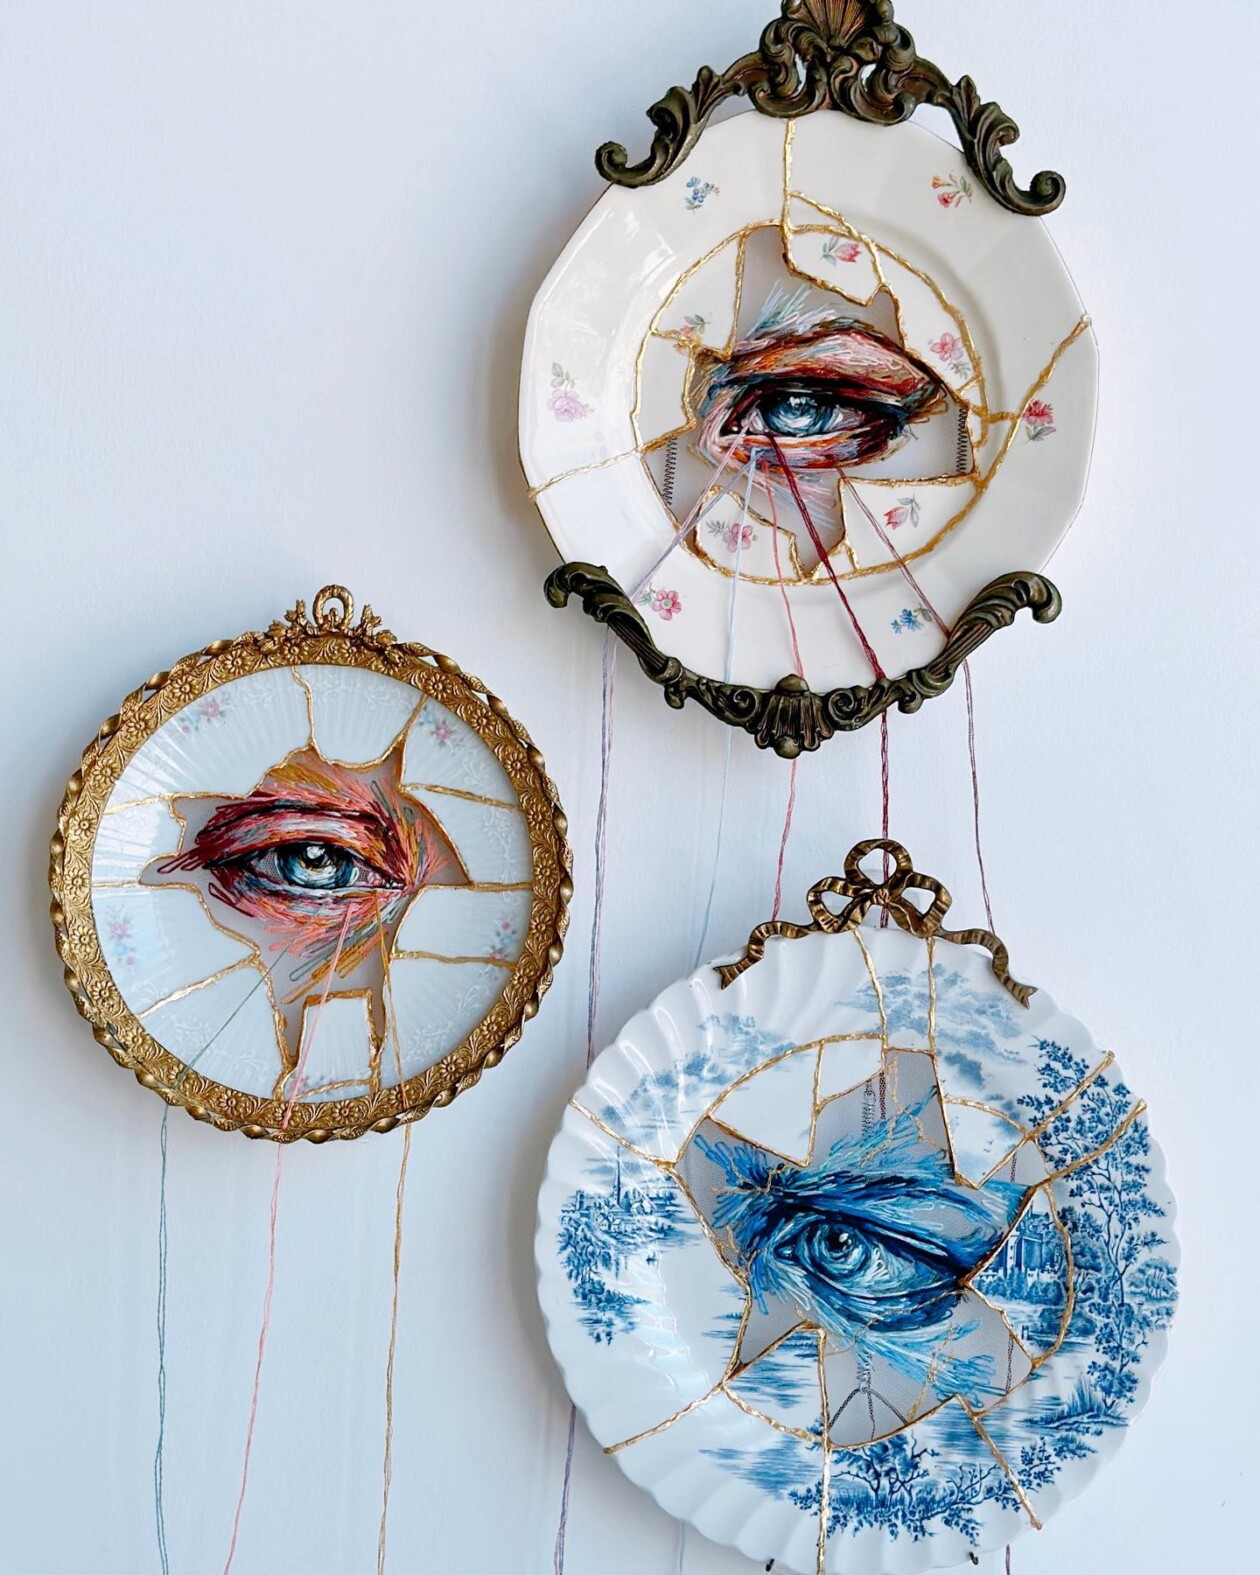 Embroidered Kintsugi, Delicate And Meaningful Mixed Media Artworks By Kathrin Marchenko (2)